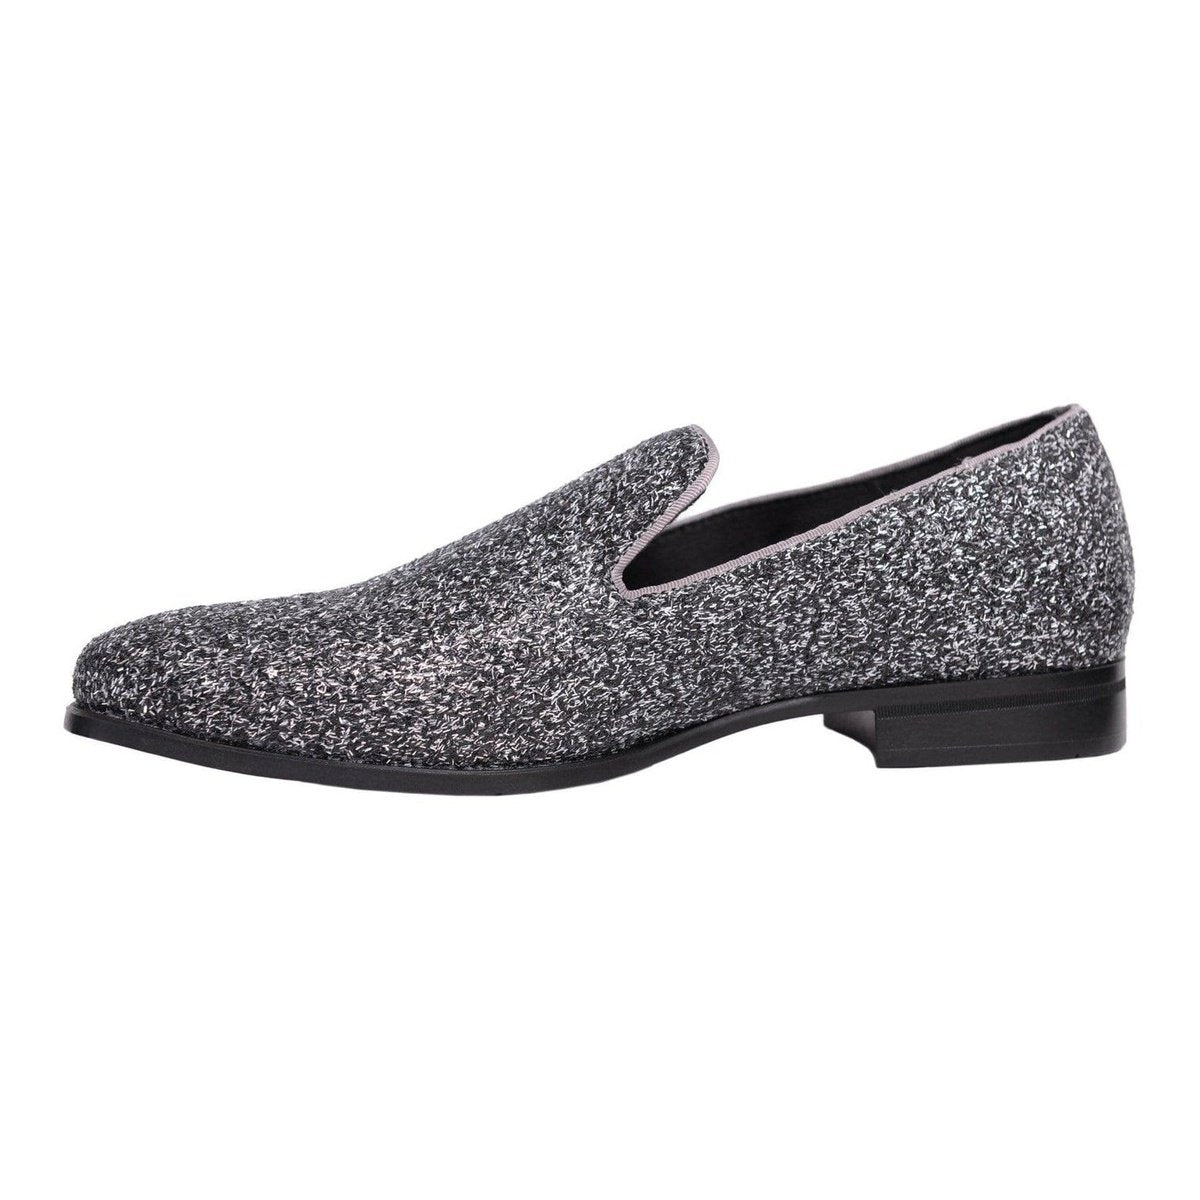 Stacy Adams Swank Silver &amp; Gray Sparkle Slip-on Dress Shoes - The Suit Depot